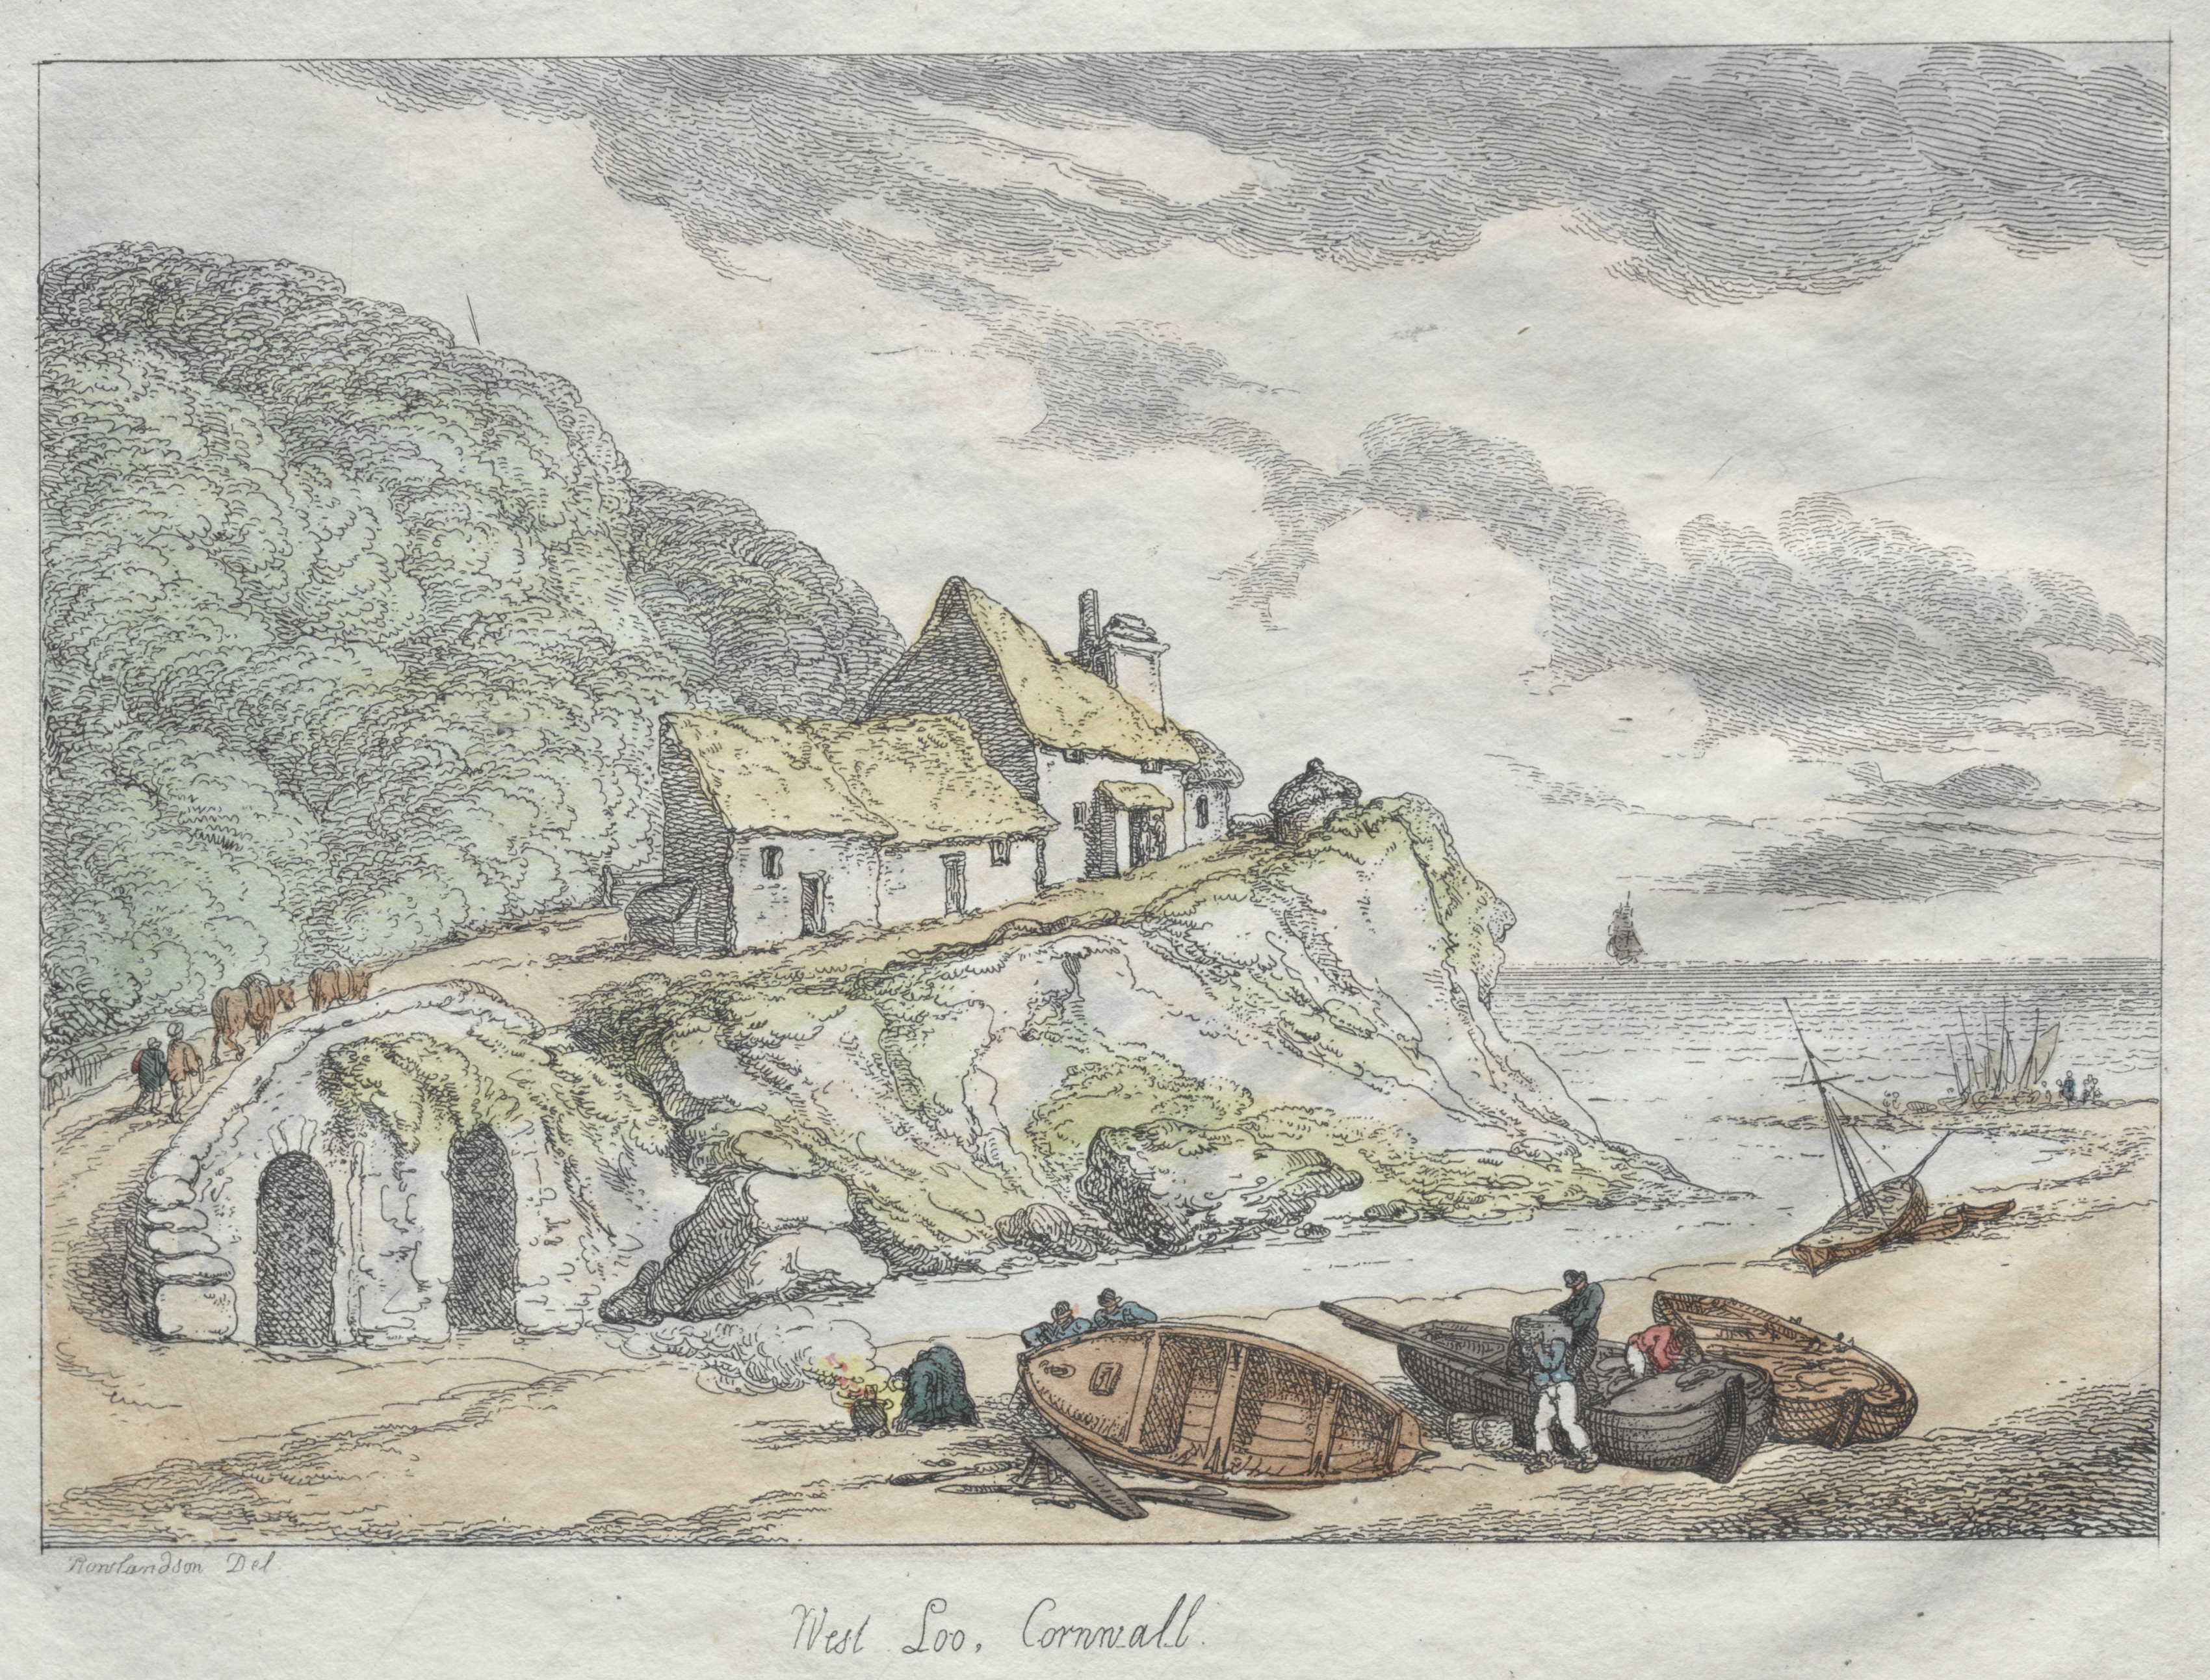 Rowlandson's Sketches from Nature:  West Loo, Cornwall